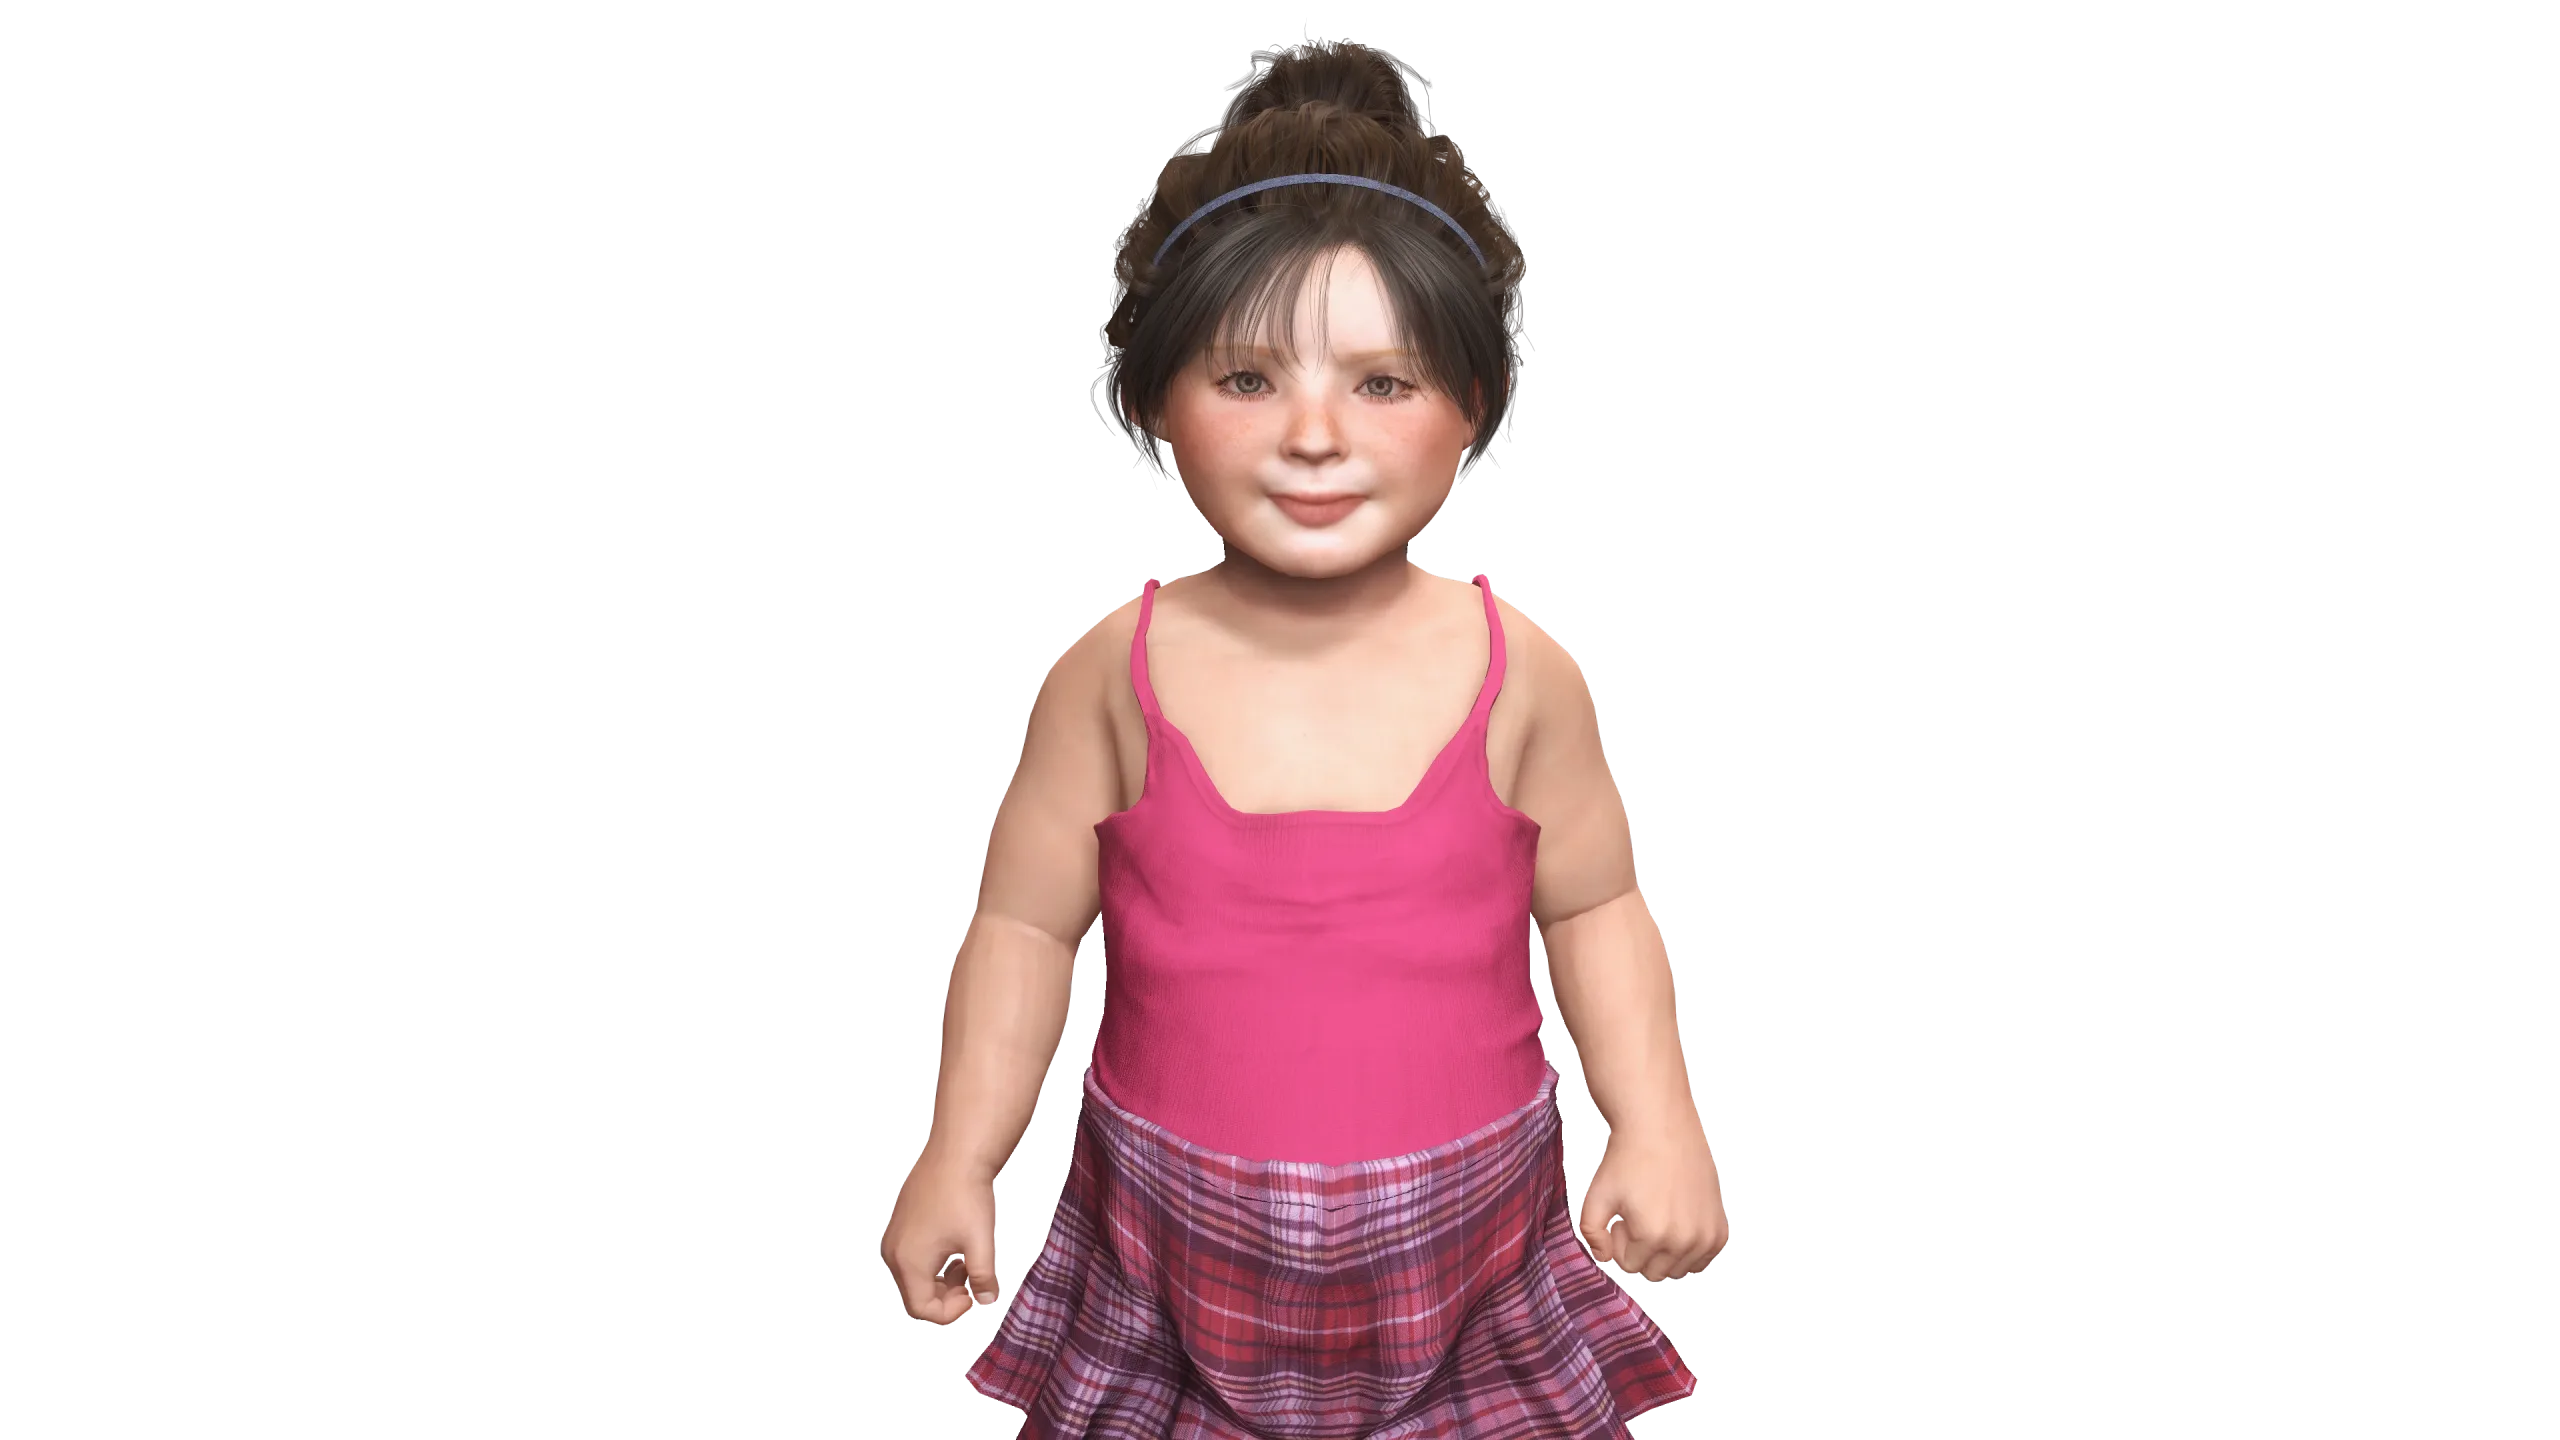 AAA 3D REALISTIC CHARACTER-EUROPEAN TODDLER or LITTLE GIRL 01